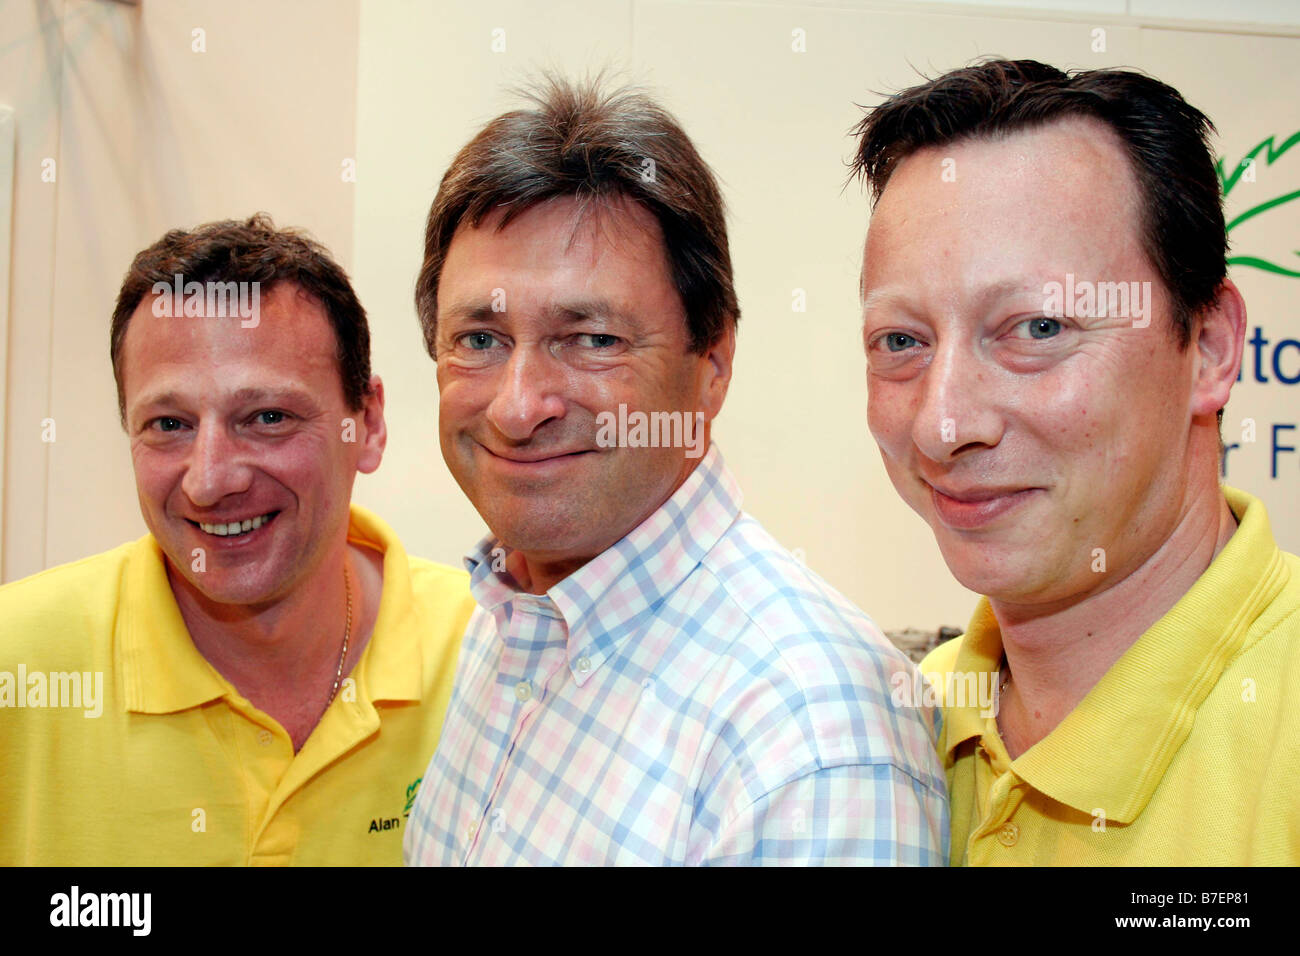 Celebrity gardener Alan Titchmarsh (centre) and his two brothers. Taken at BBC Gardening exhibition at the GMEX, Birmingham, UK Stock Photo